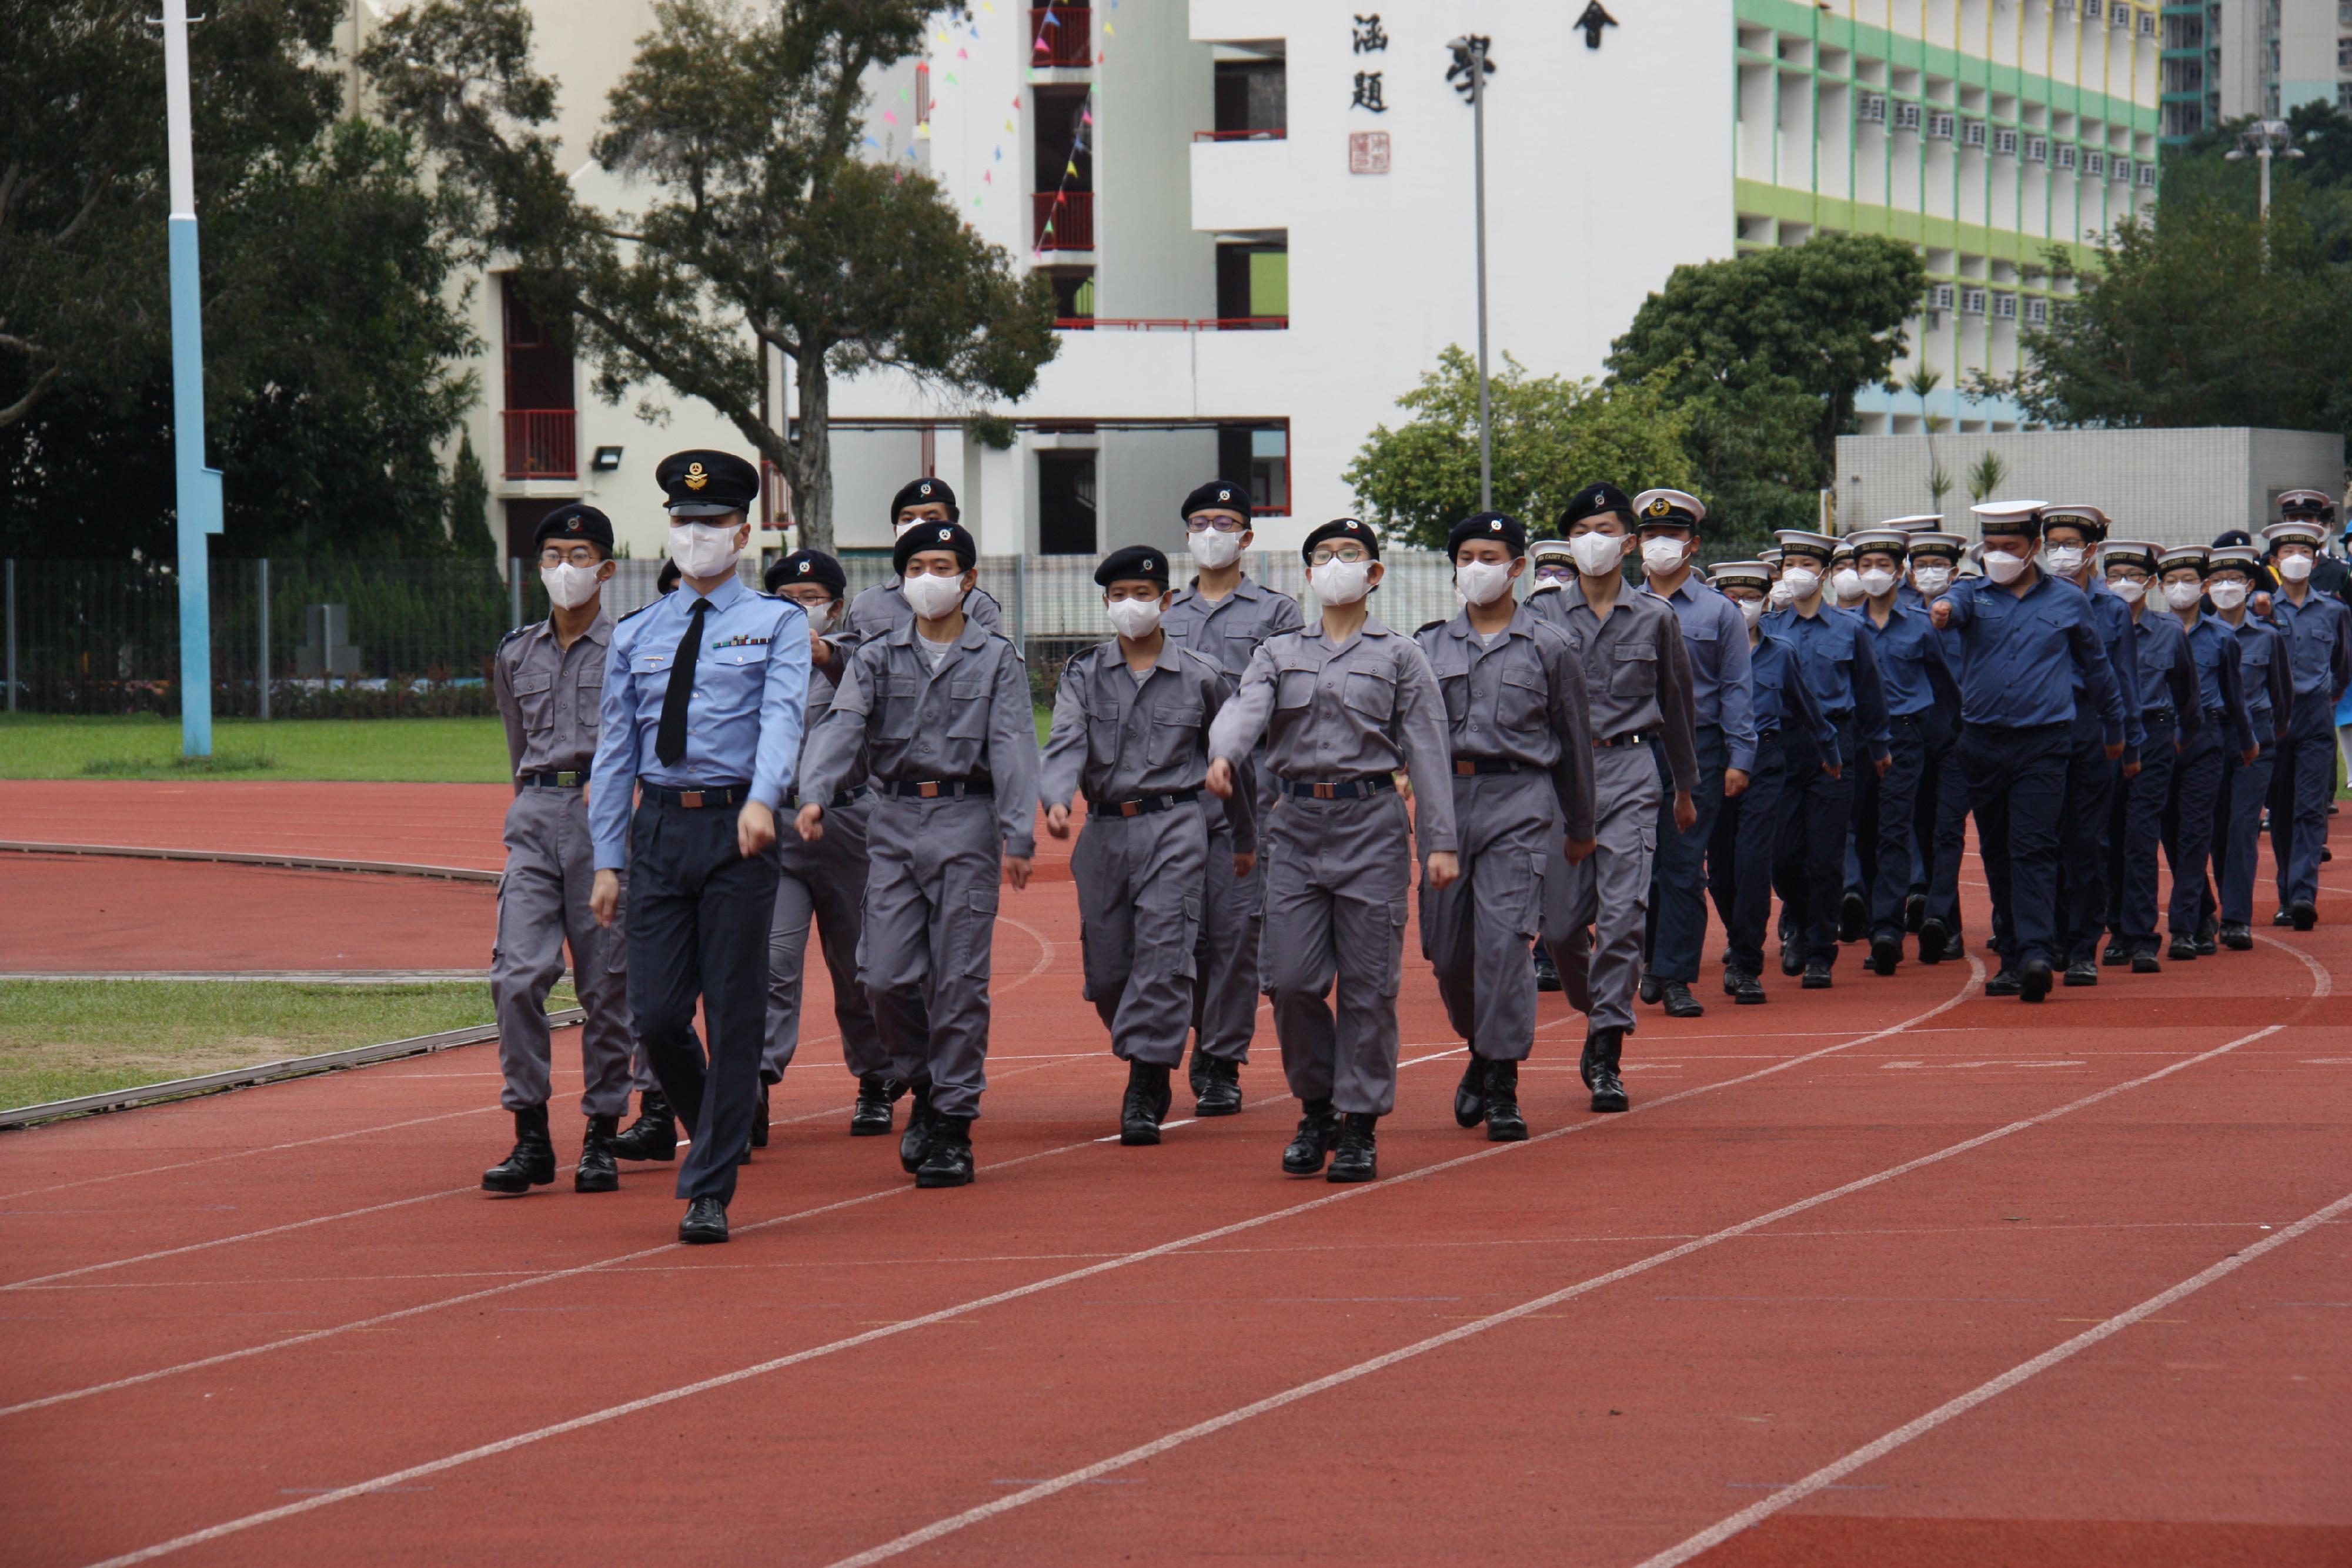 With the aim of enhancing different social sectors' awareness of the Constitution and promoting the constitutional spirit, the Kwun Tong District Office, together with local district organisations, organised promotional and educational activities on the Constitution today (December 4). Photo shows youth uniformed groups marching in at the "Promotion of Constitution Day 2022 by Different Sectors of Kwun Tong – Display of National Flag" activity. 